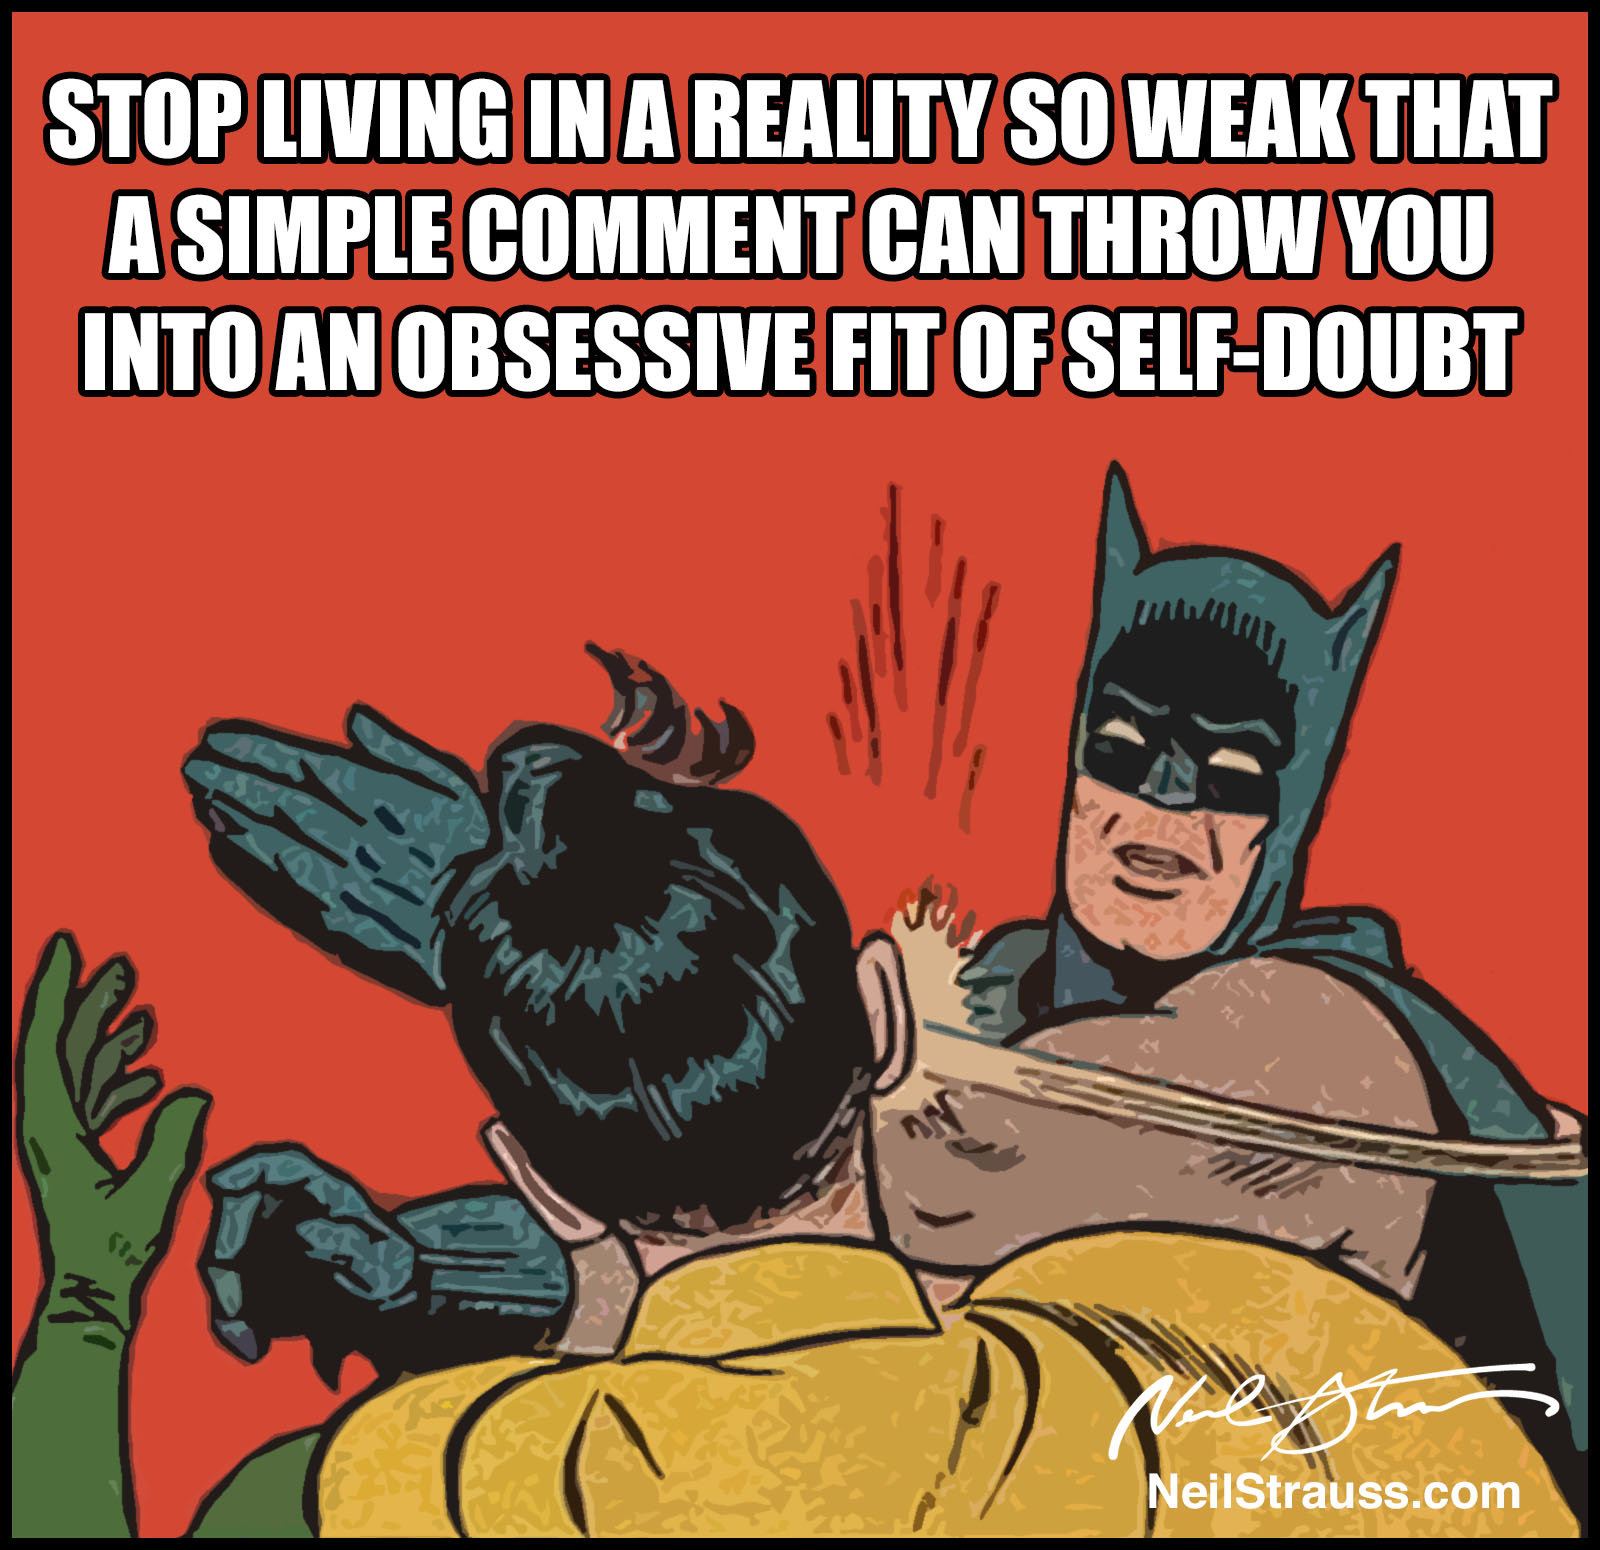 Meme: Stop living in a reality so weak that a simple comment can throw you into an obsessive fit of self-doubt.